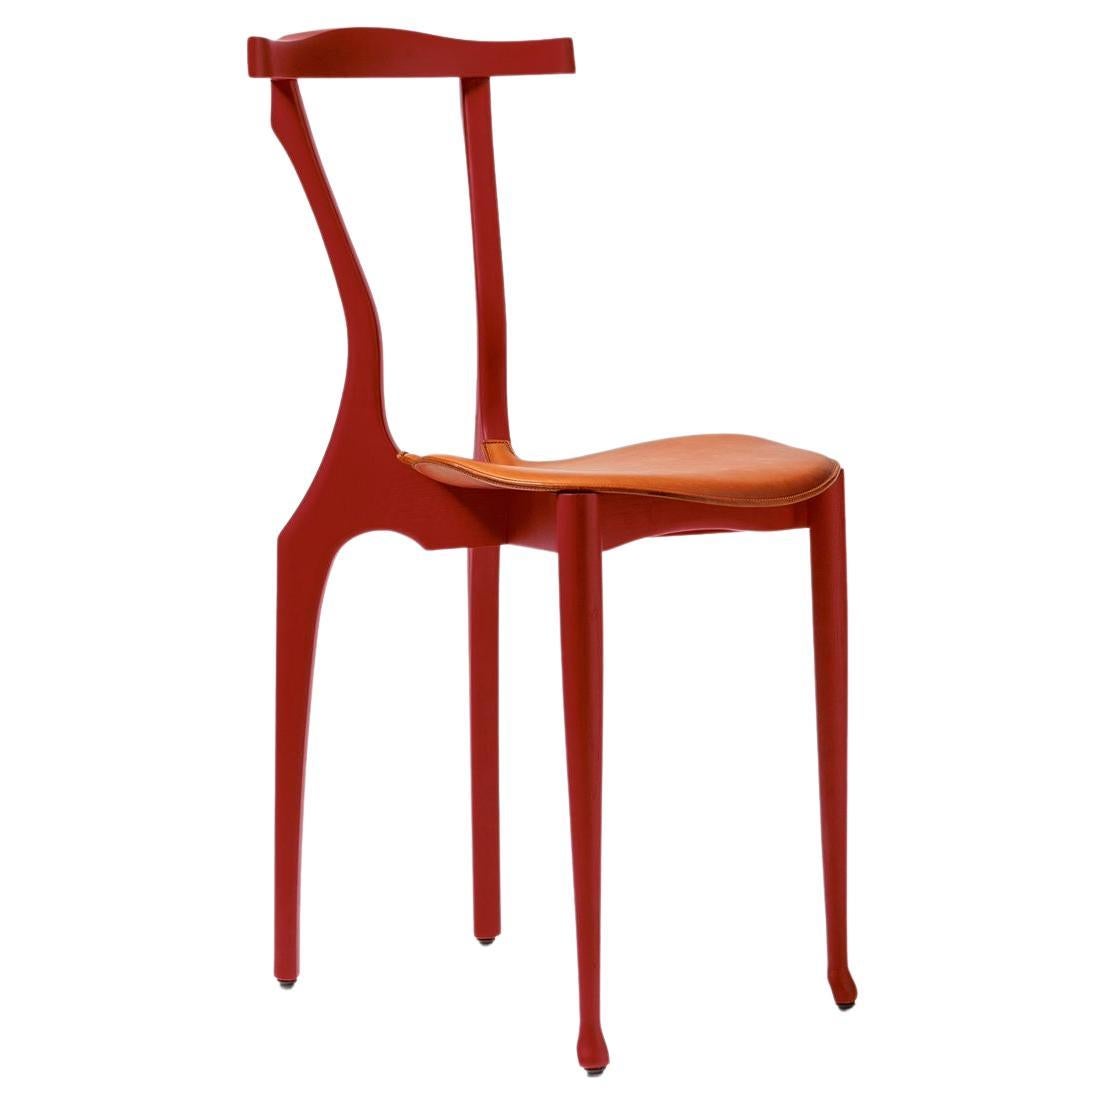 Contemporary "Gaulinetta" Dining Chair Red Lacquered Ash Wood by Oscar Tusquets For Sale